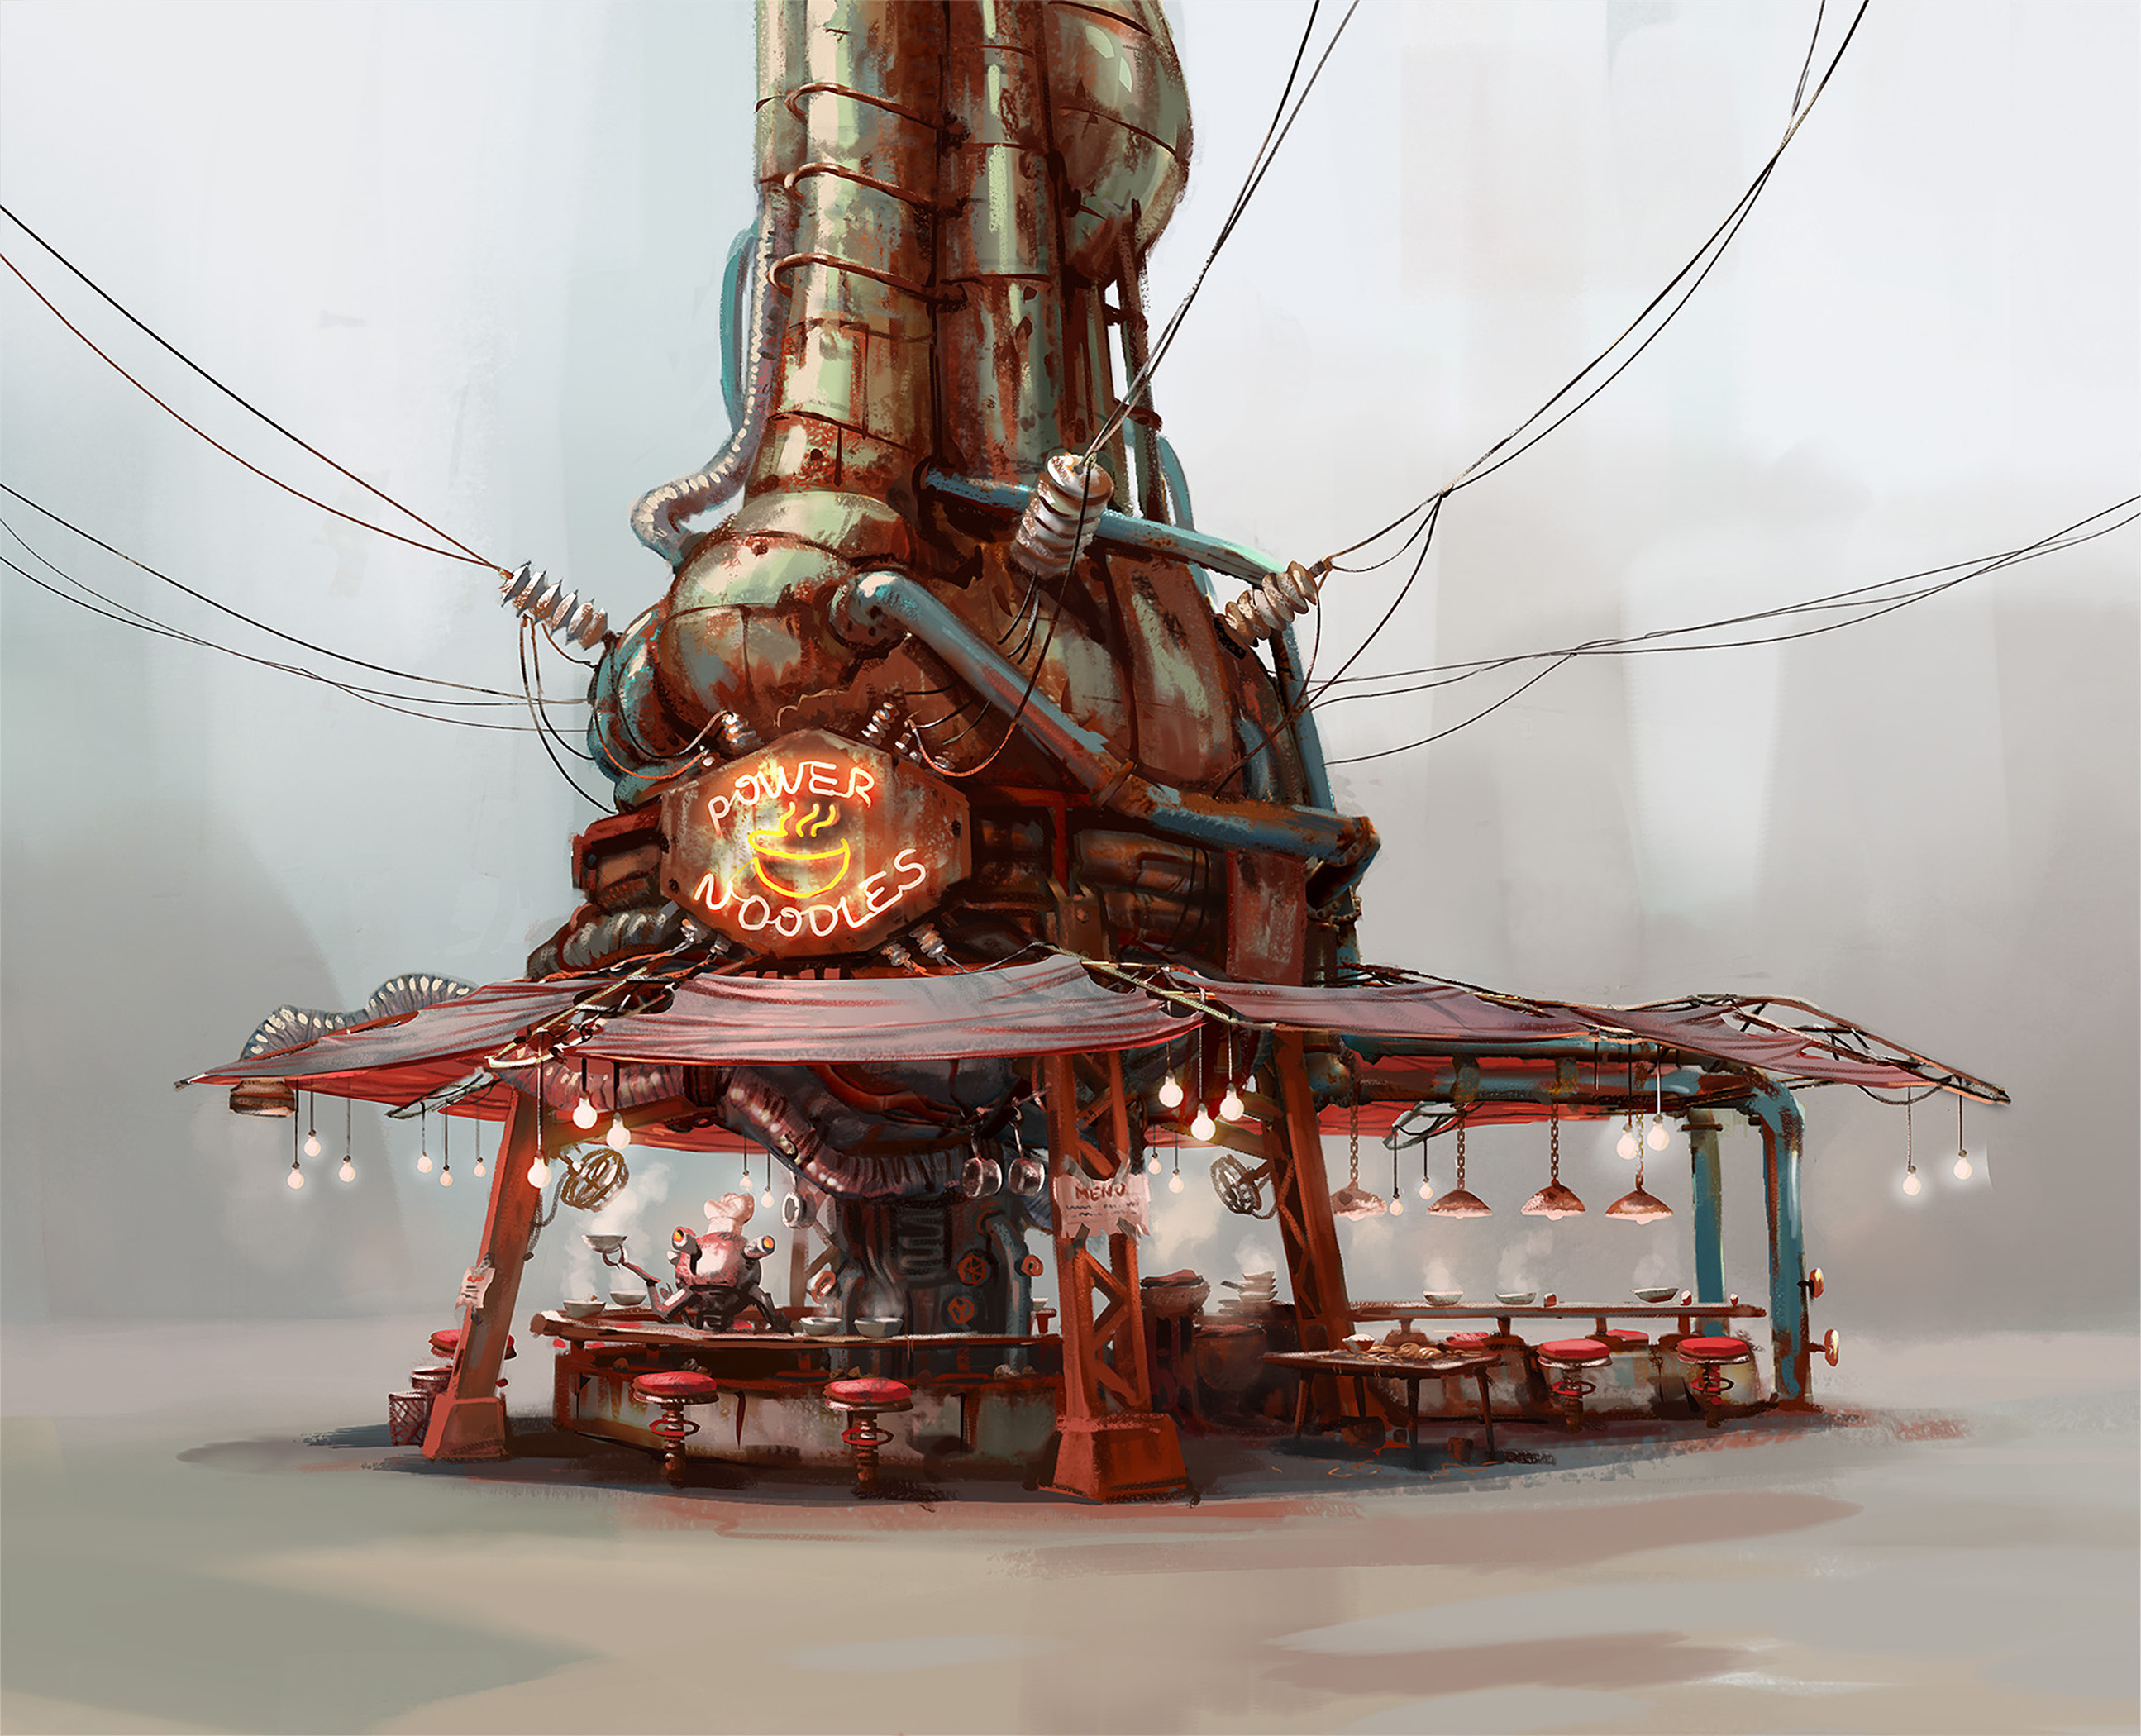 Concept for the Noodle house in Fallout 4 for Bethesda Game Studios.